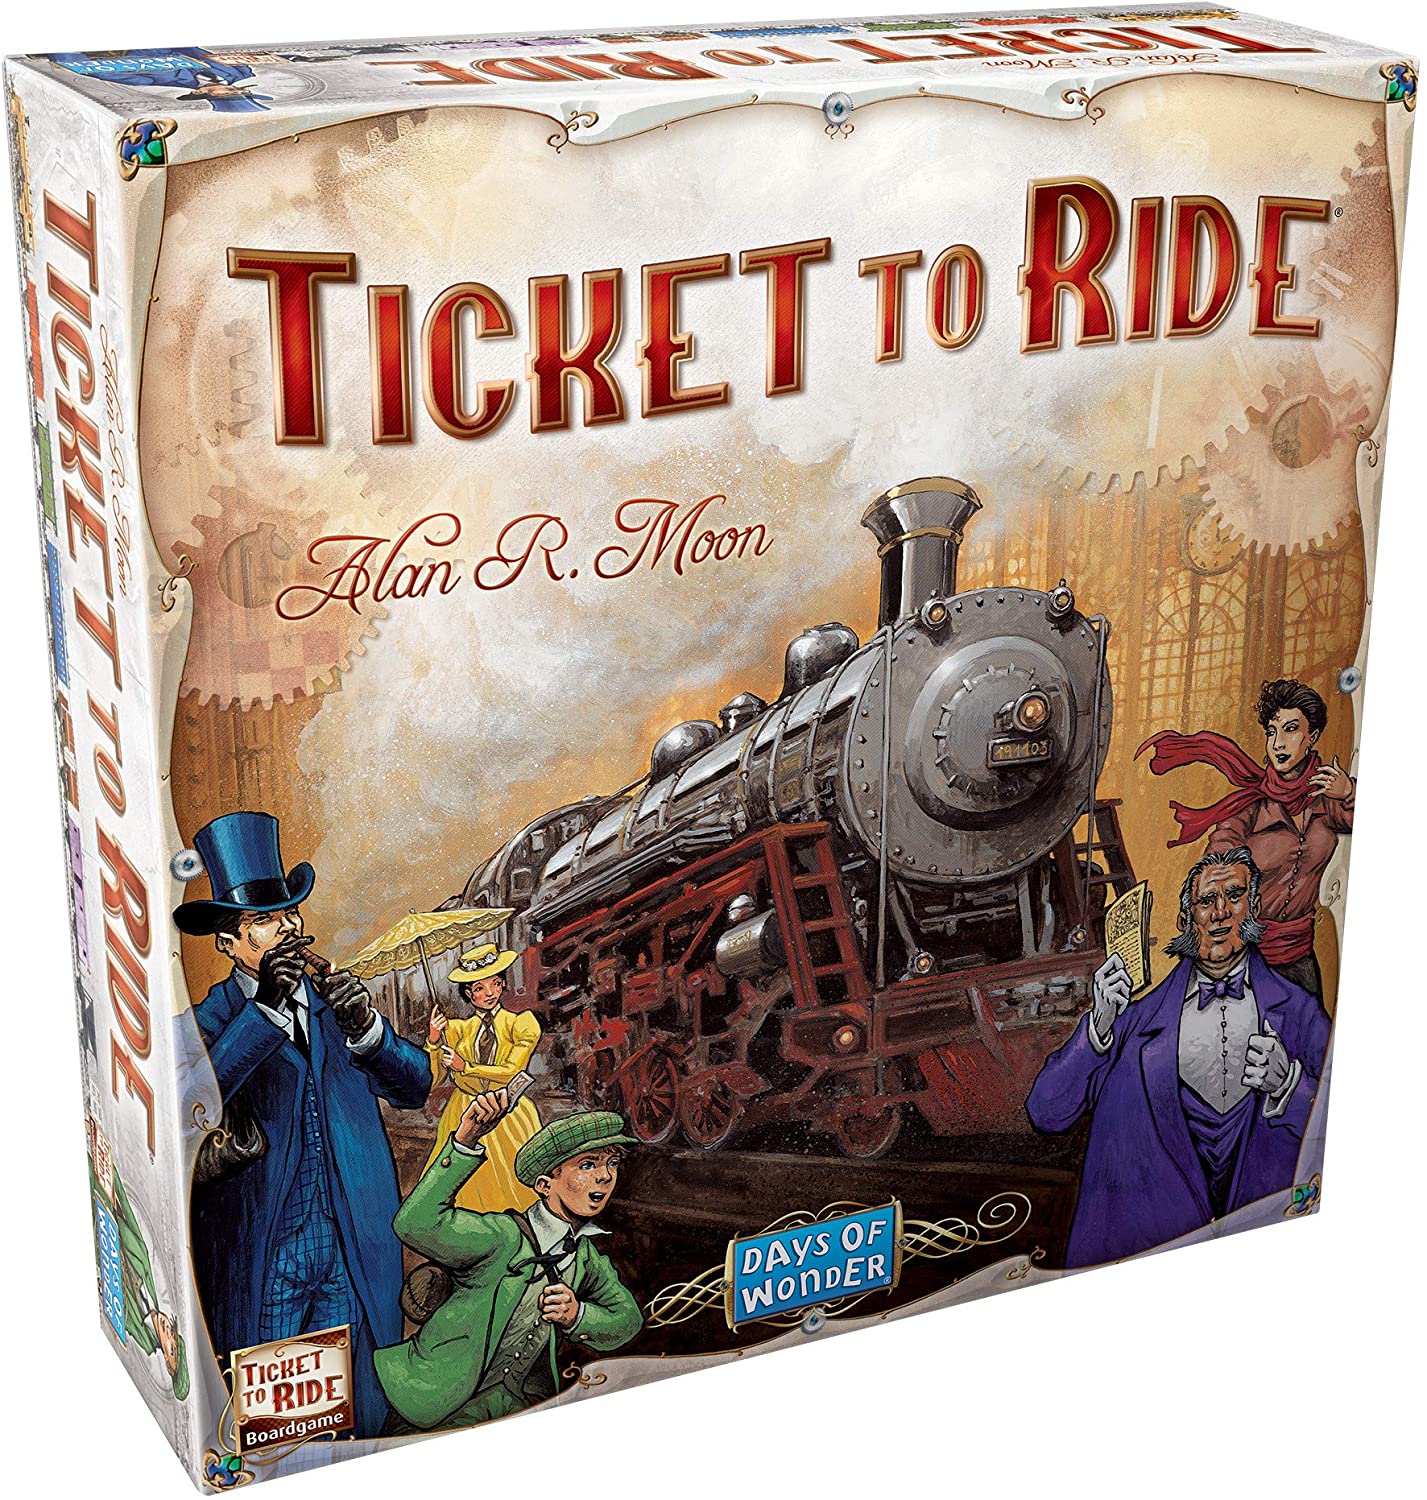 Ticket to Ride (2004)